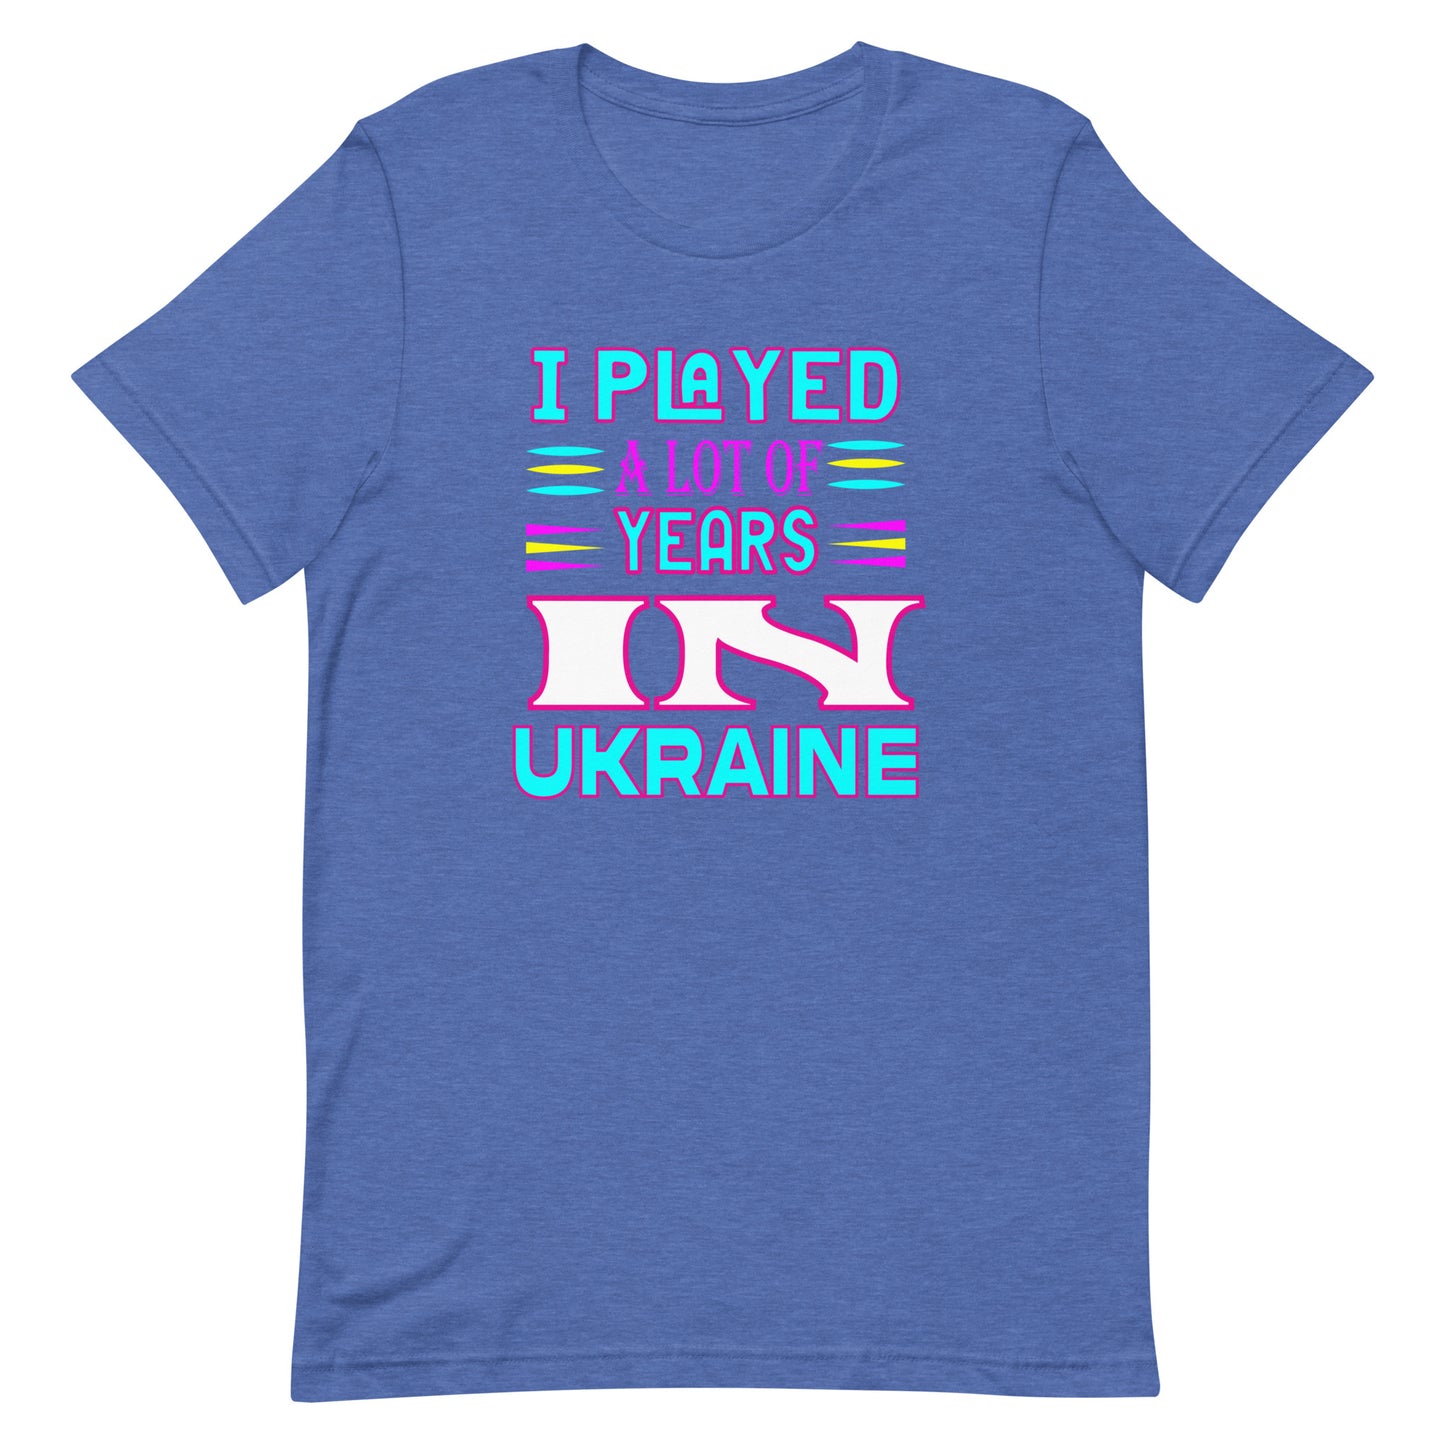 I played a lot of years in Ukraine | Unisex t-shirt